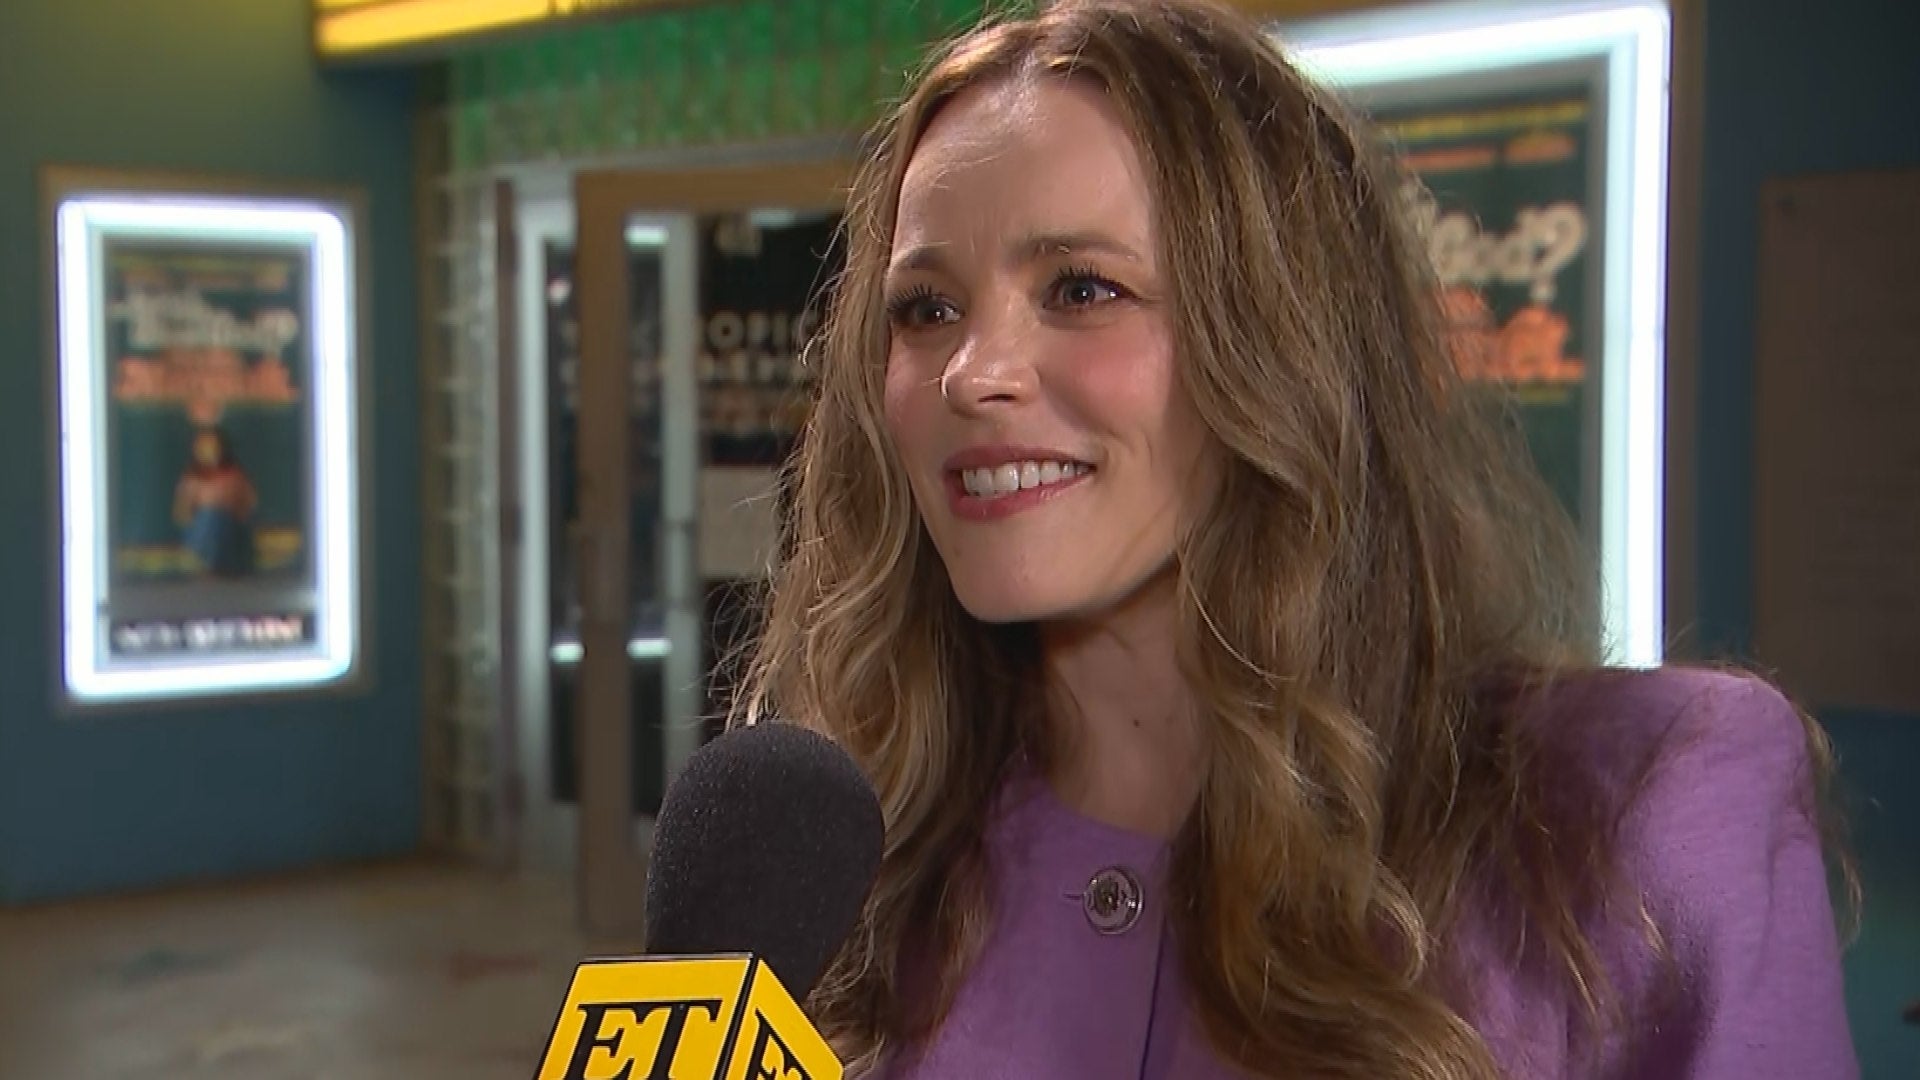 Mean Girls: Even Rachel McAdams had to deal with her own real-life